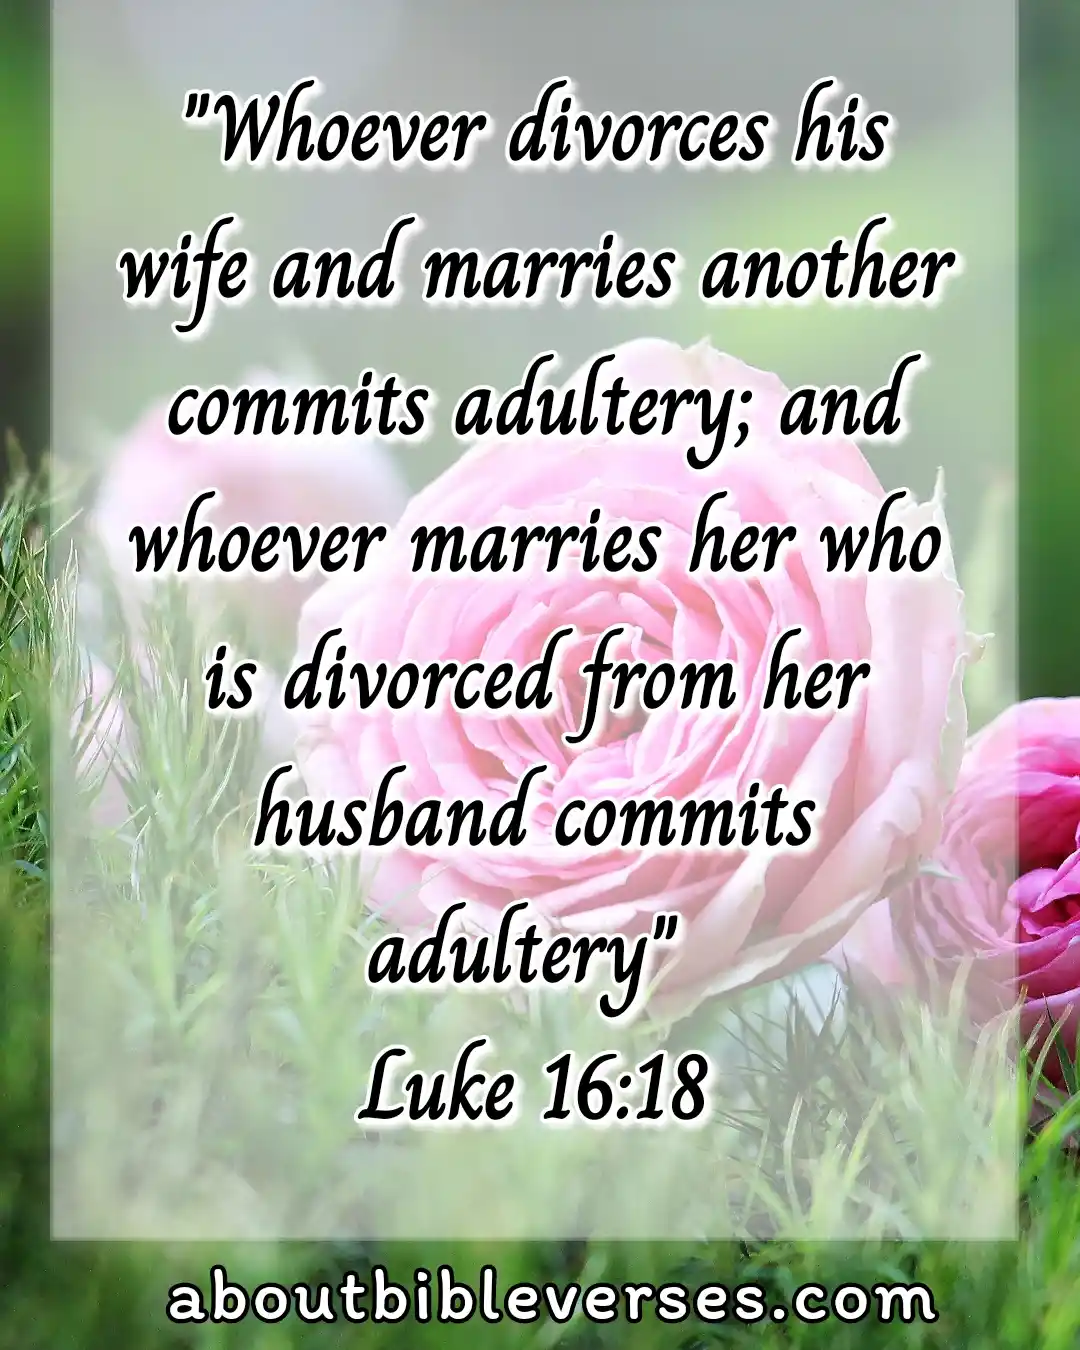  Bible Verses About Divorce And Remarriage(Luke 16:18)